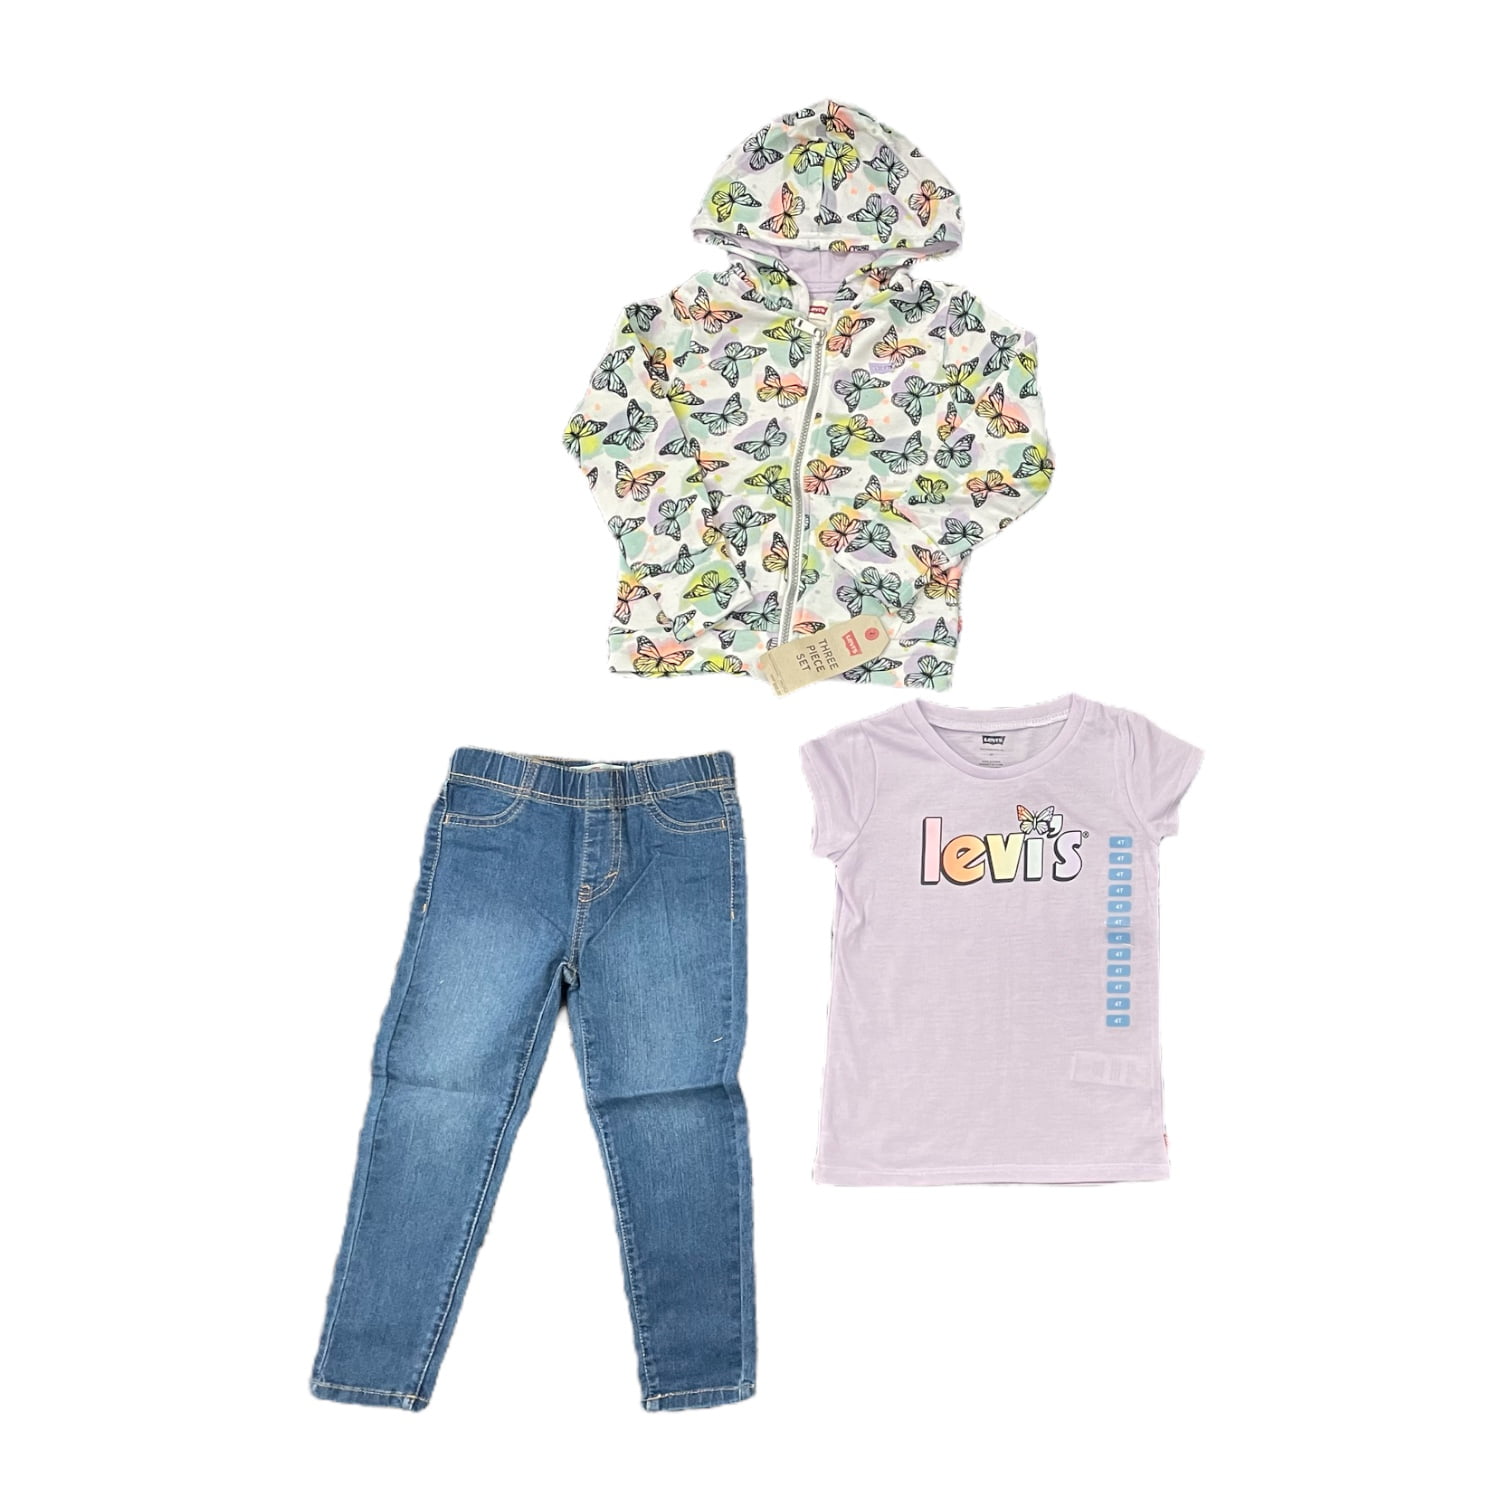 Levi's Girl's 3 Piece Zip Jacket Graphic T-Shirt and Denim Outfit Set ...